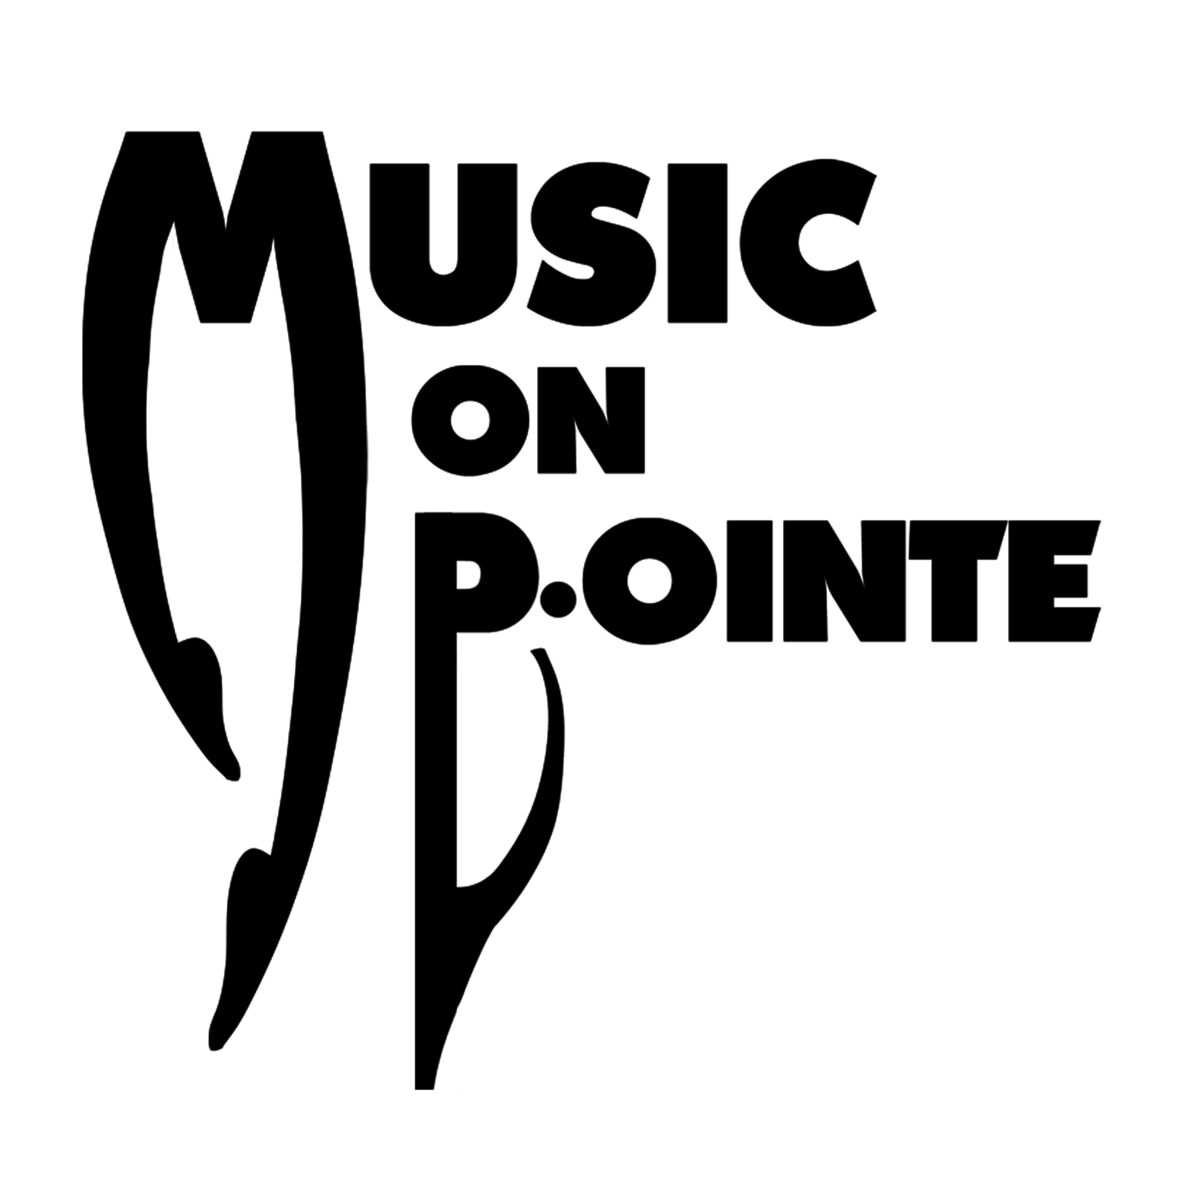 A black and white image of the logo for music on pointe.